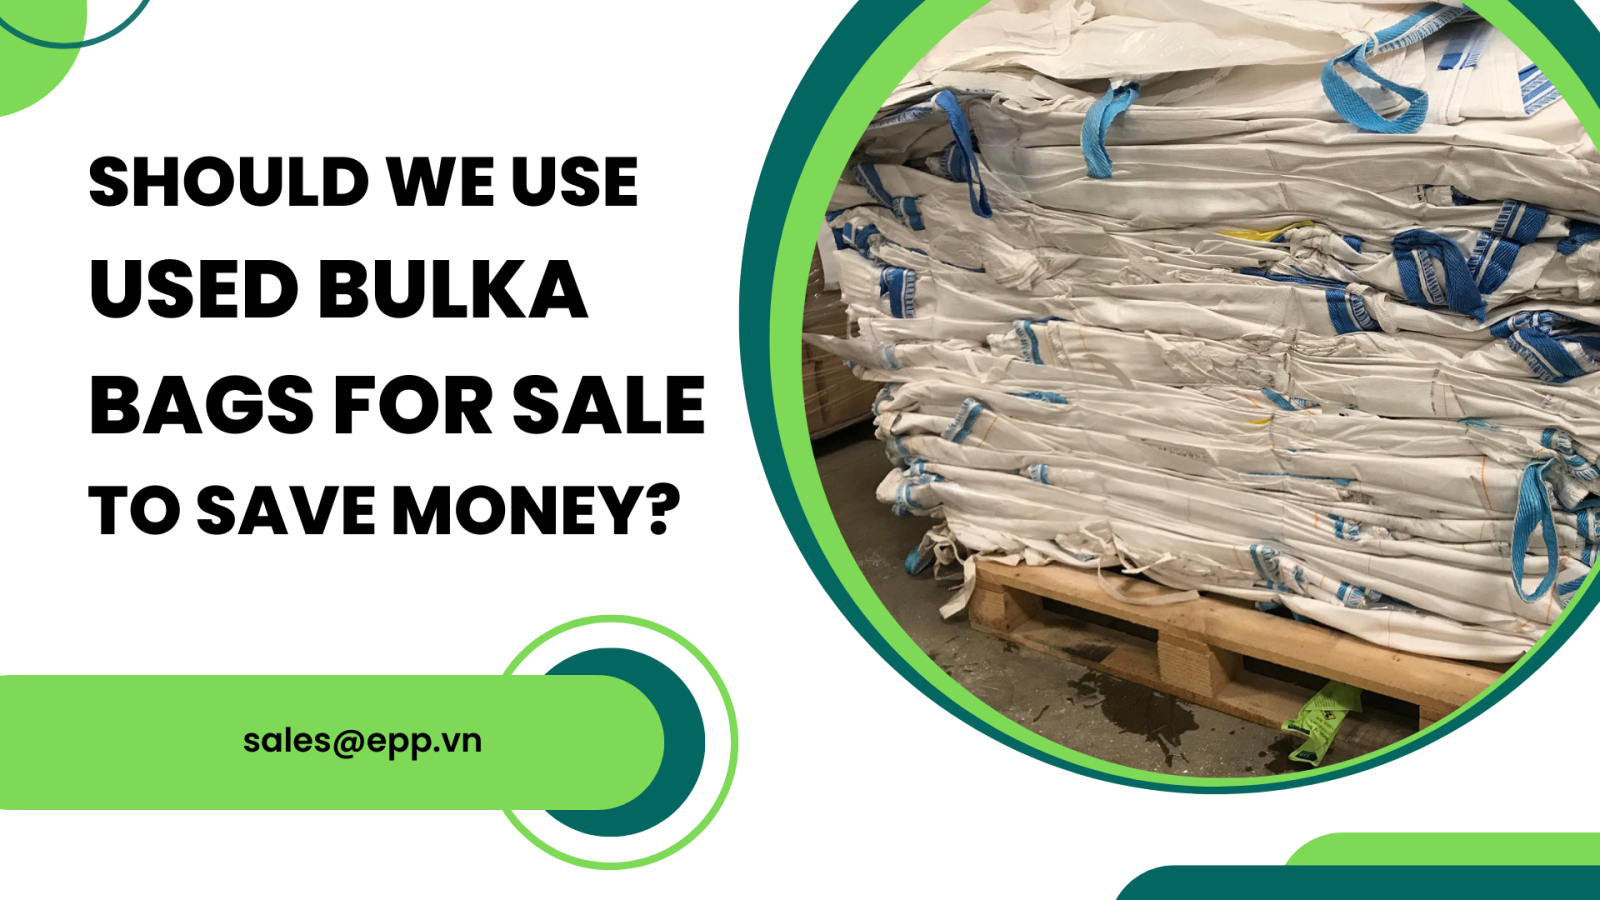 Should-we-use-used-bulka-bags-for-sale-to-save-money.png